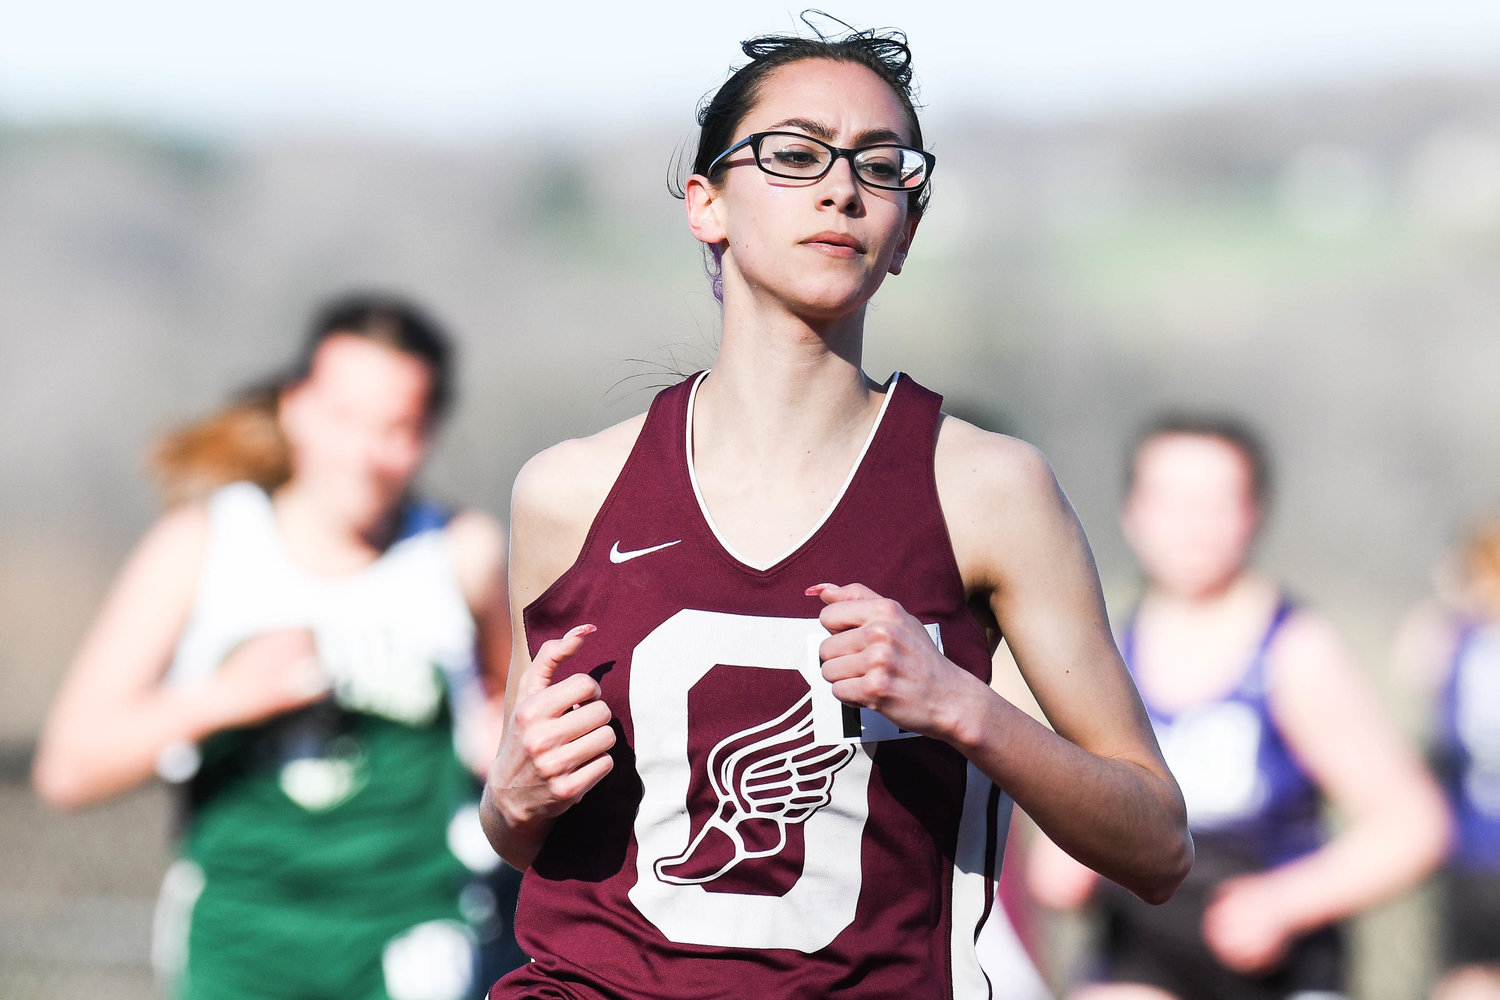 Oriskany's Paris Welker competes in the girls 3000 meter race during the Cahill Classic on Friday at Sauquoit Valley High School.